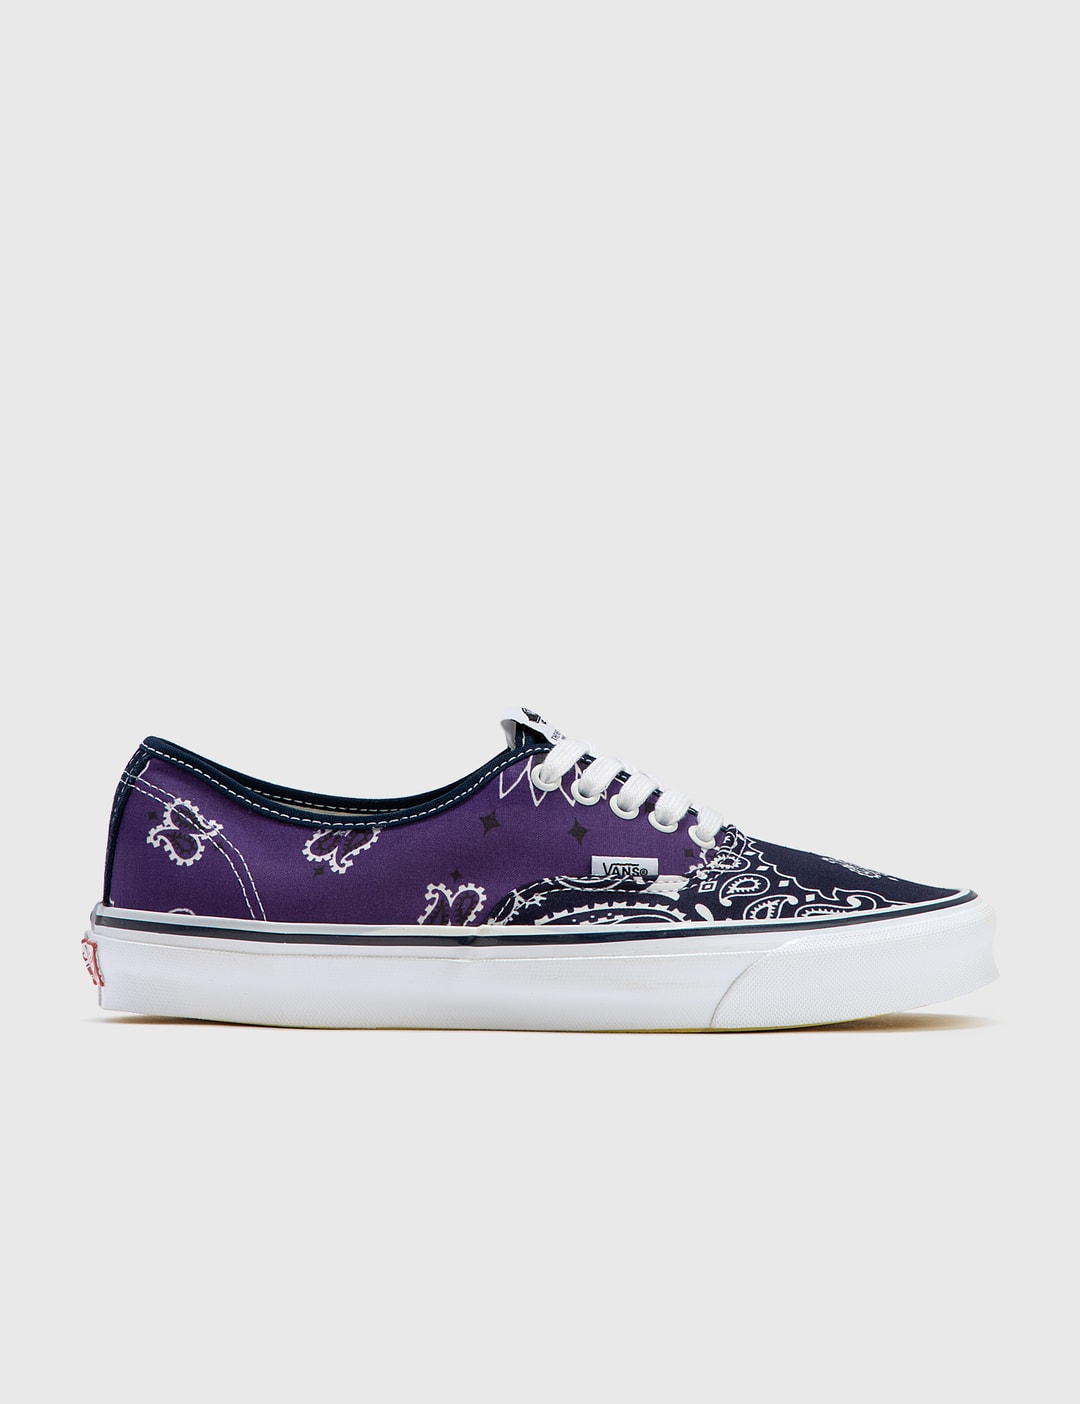 Vans - Vans x Bedwin & The Heartbreakers Vault OG Authentic LX Sneaker |  HBX - Globally Curated Fashion and Lifestyle by Hypebeast